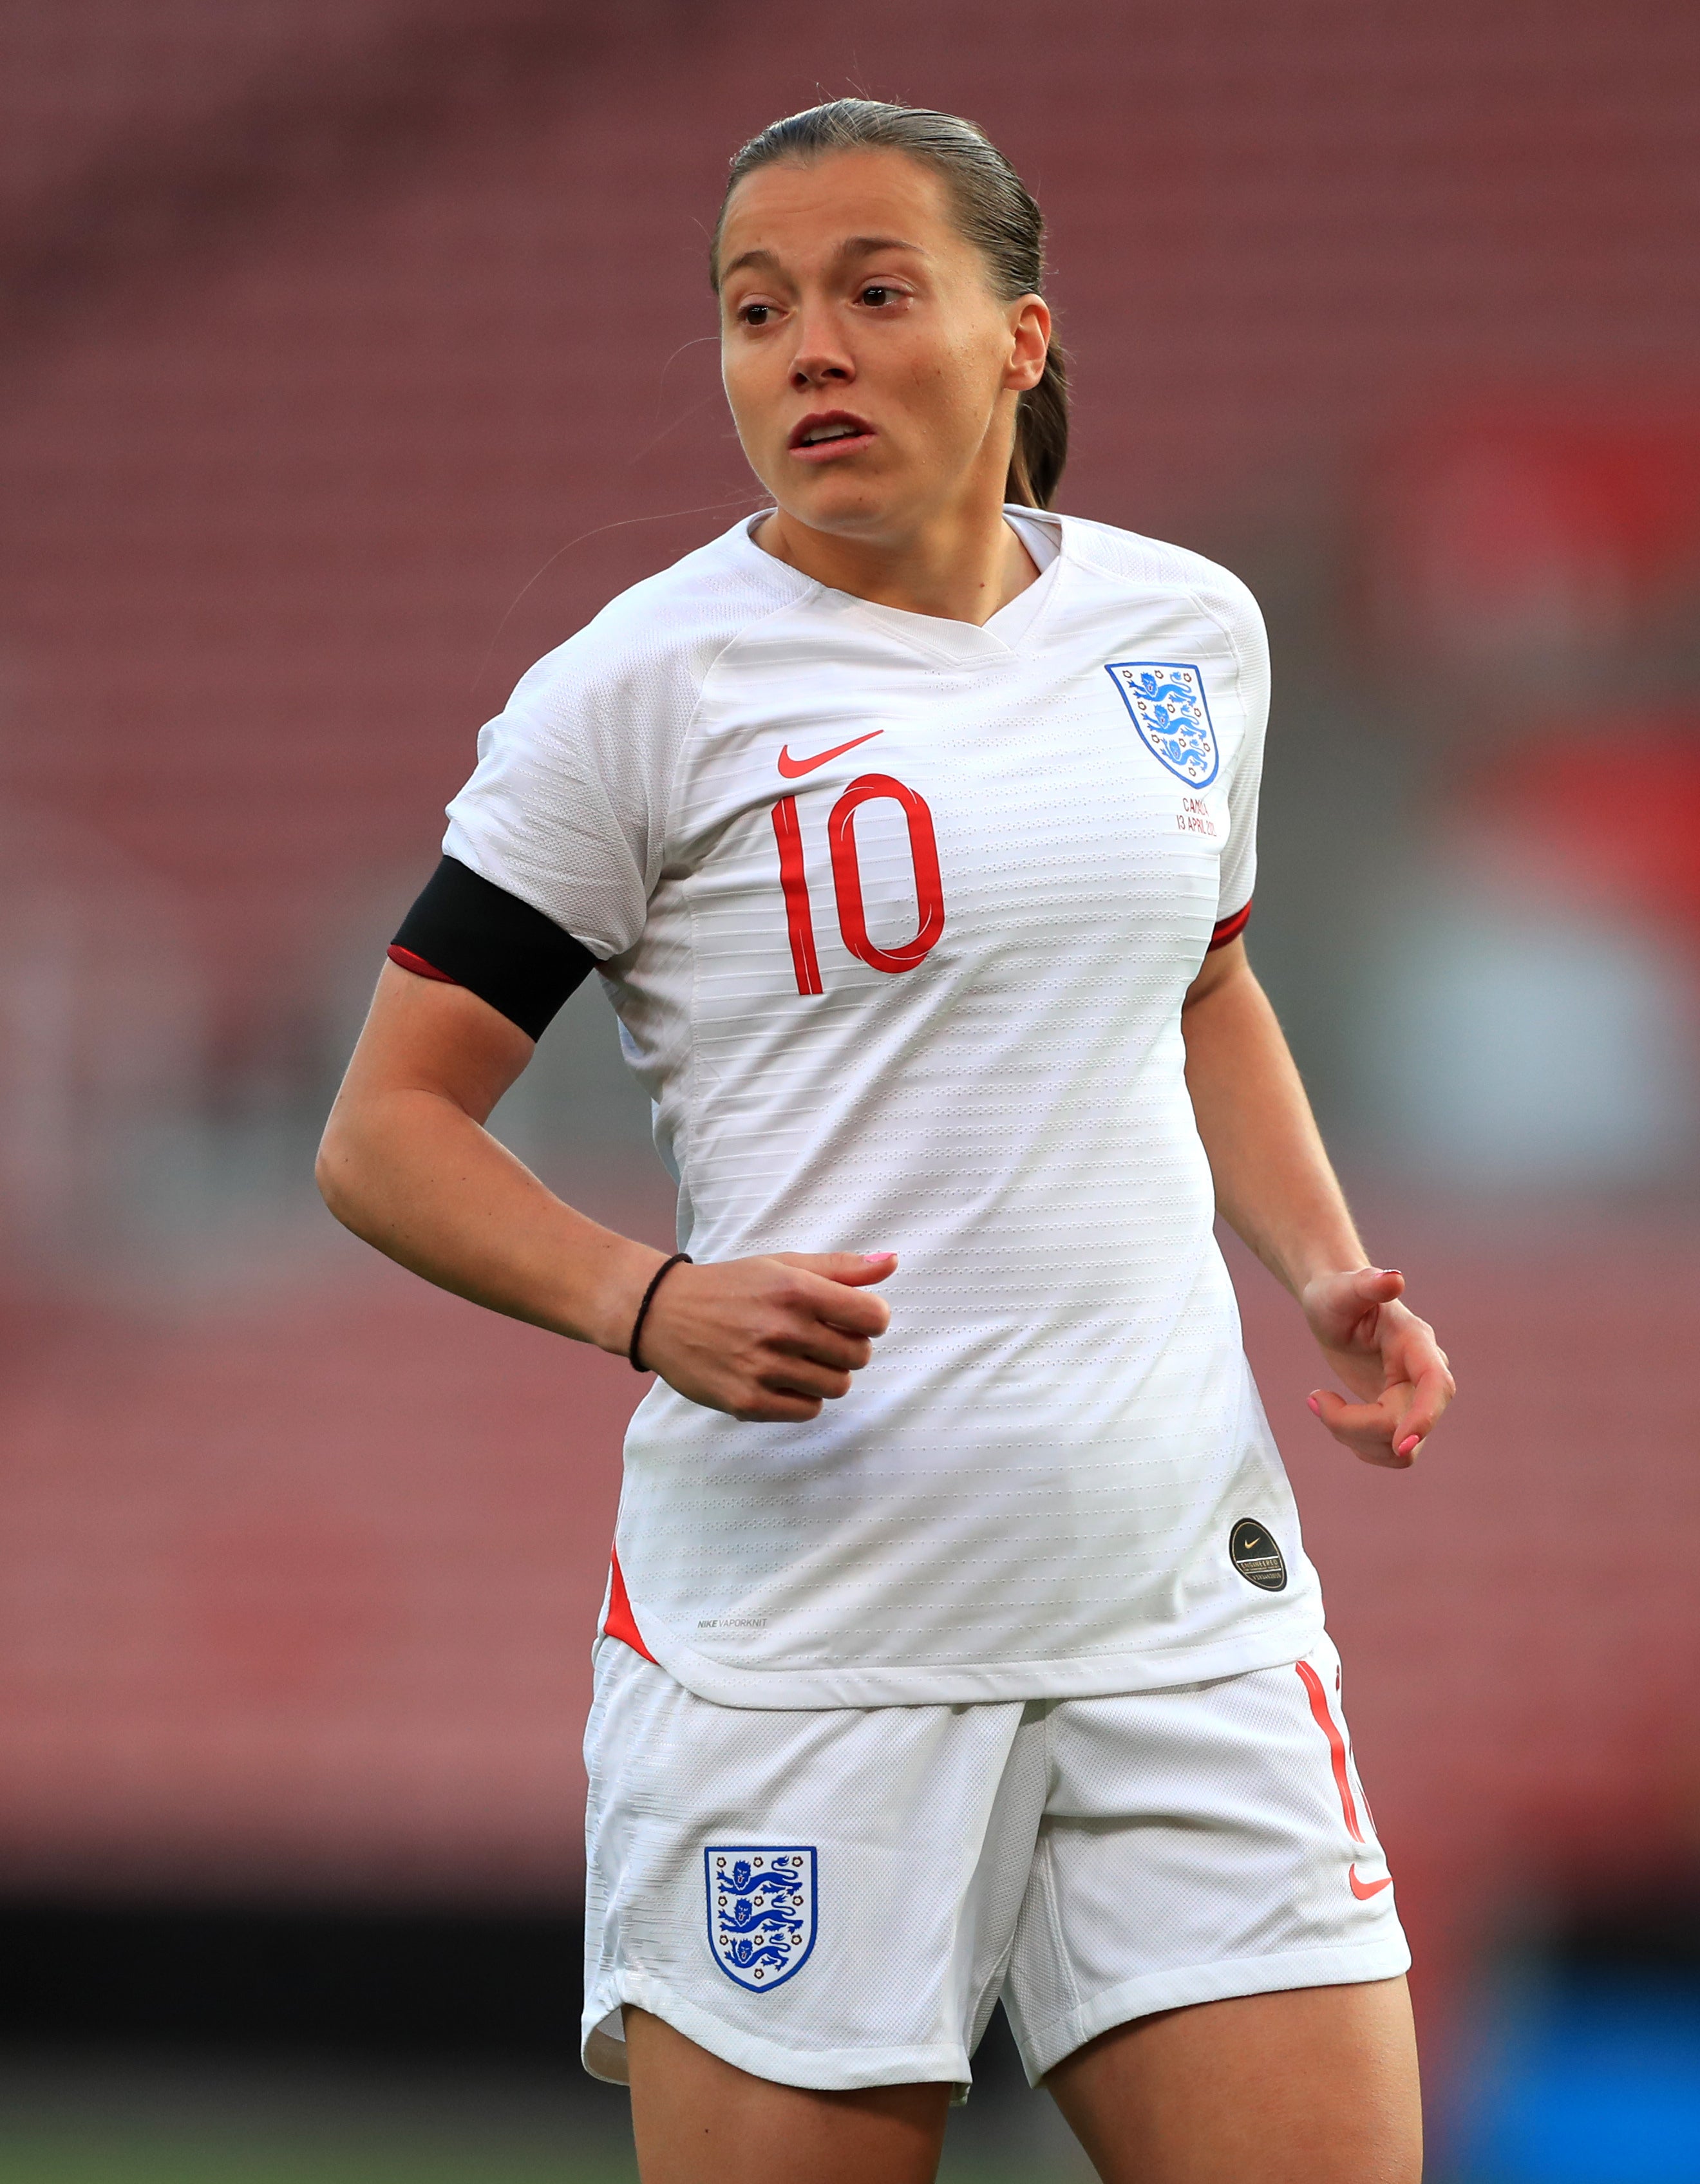 Sarina Wiegman has said a decision would be made on Fran Kirby after training on Thursday (Mike Egerton/PA).